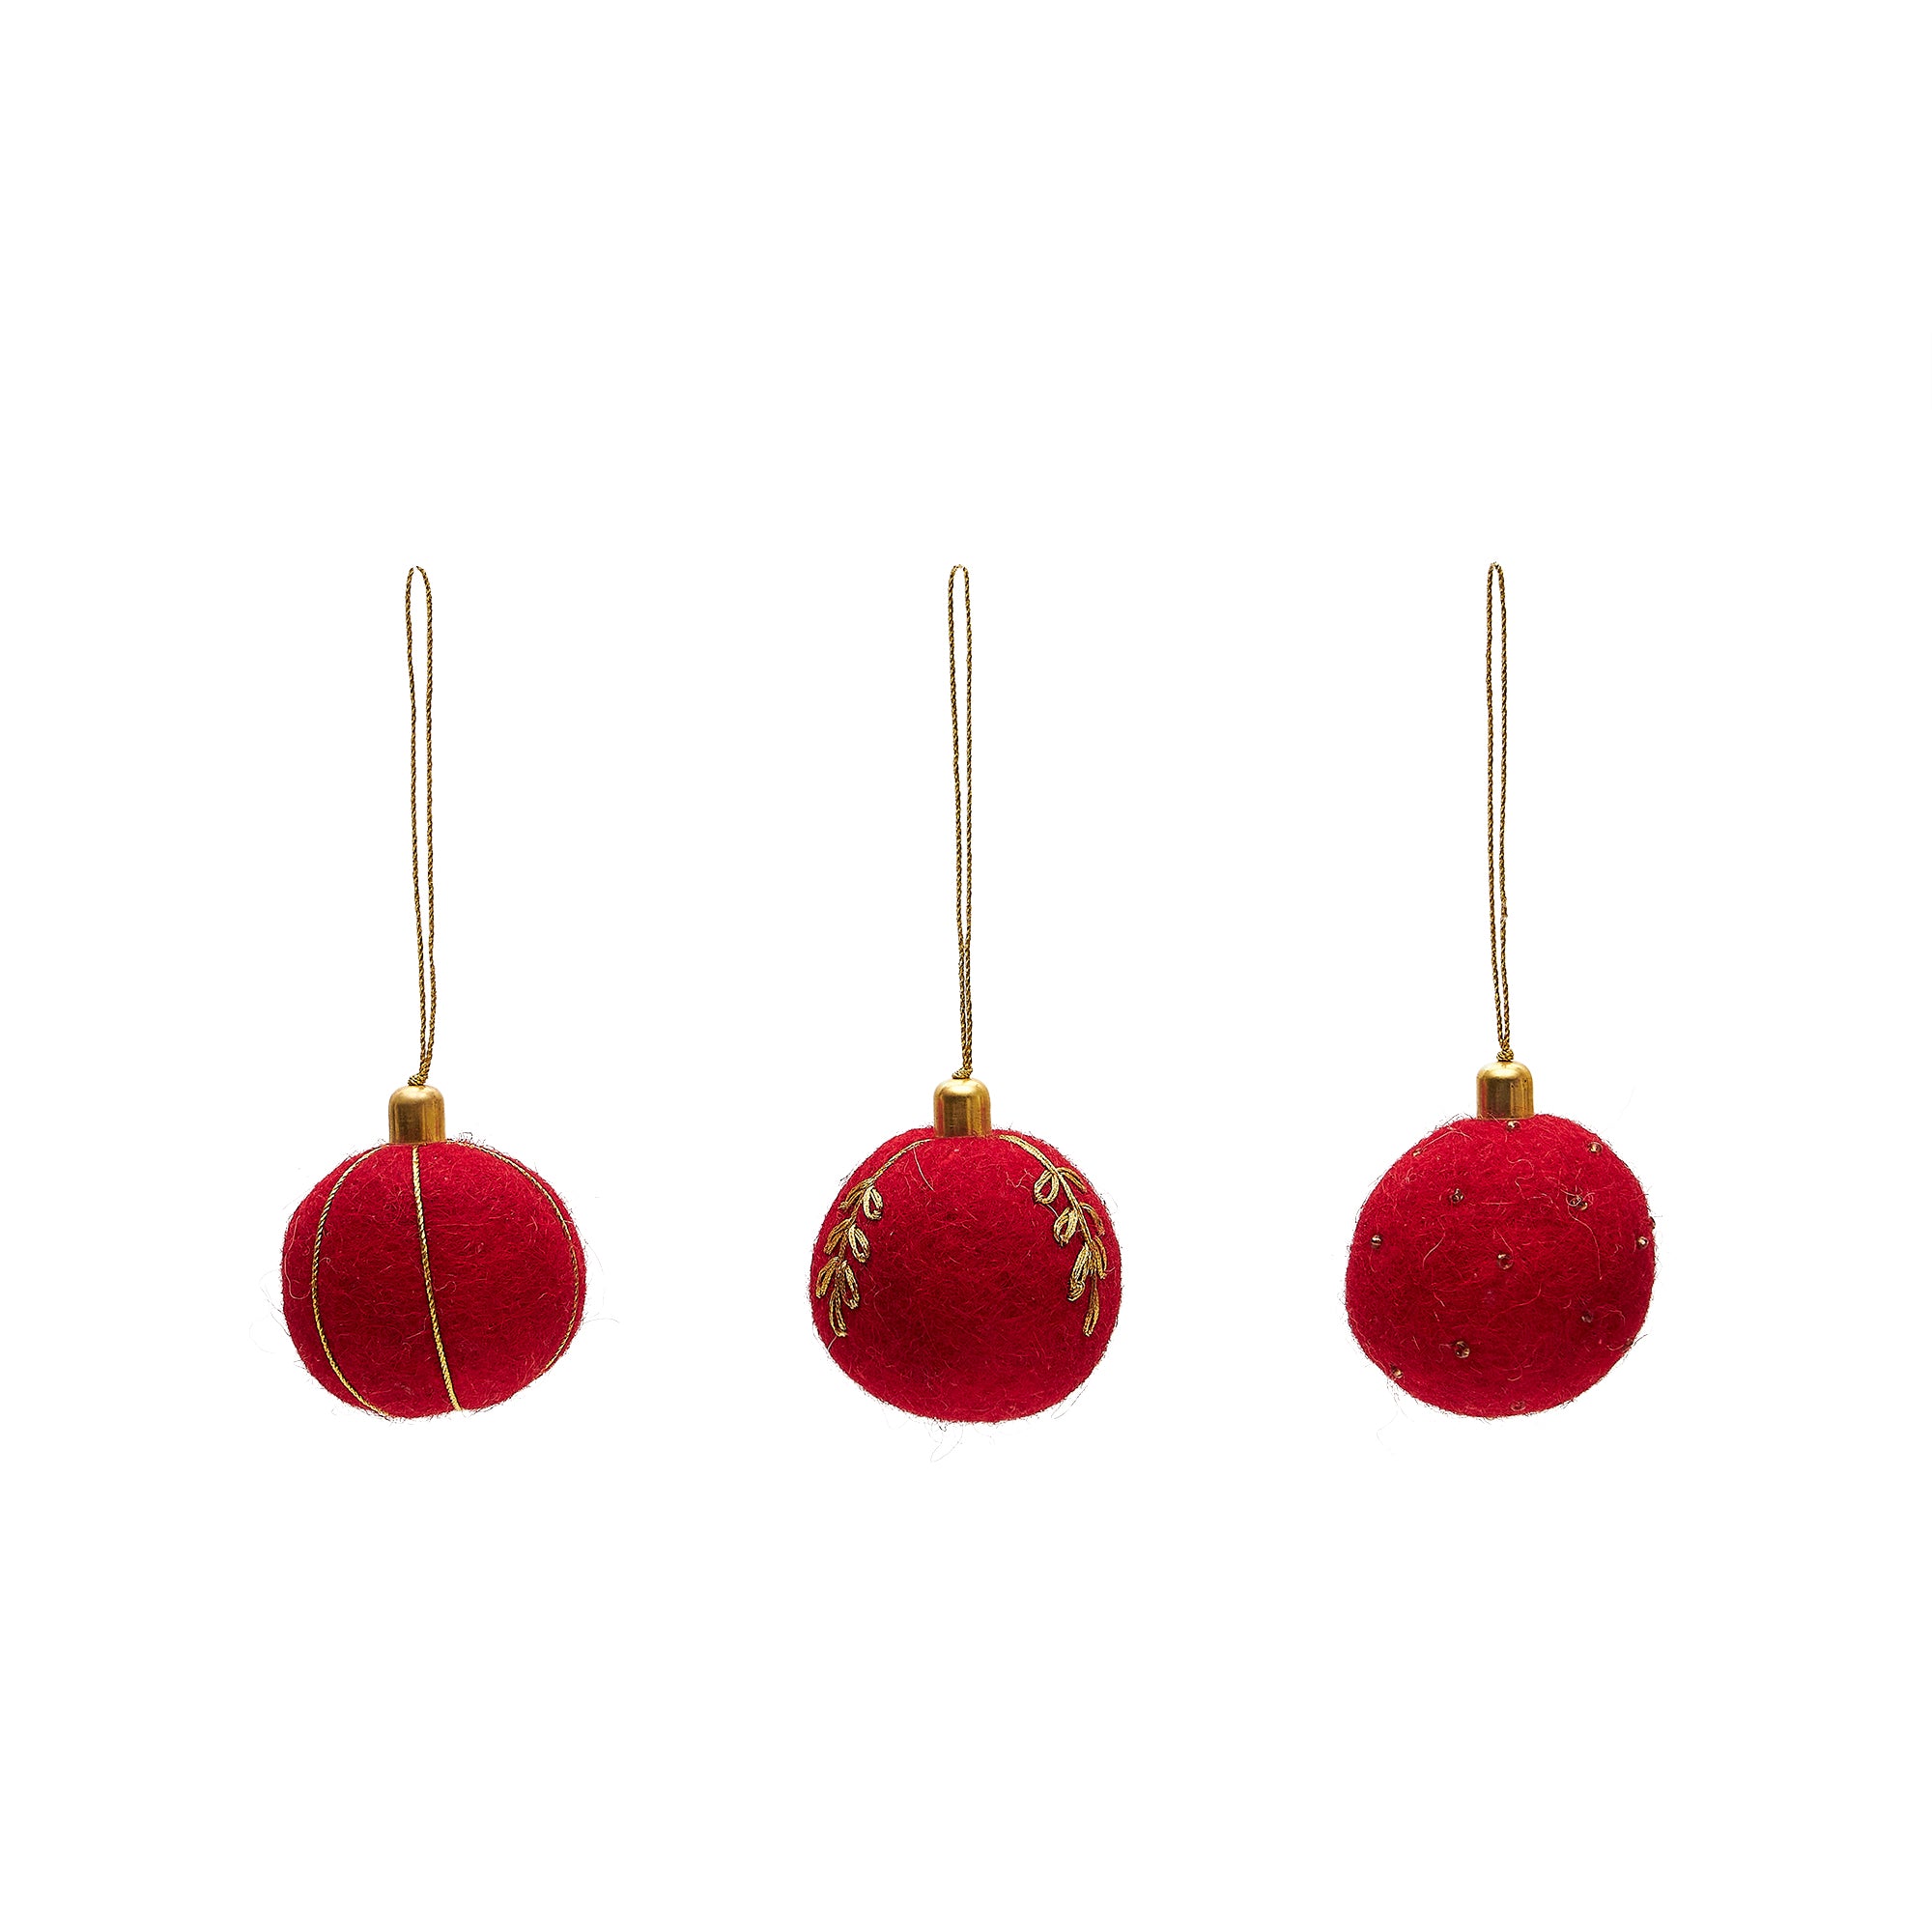 Breshi set of 3 small red decorative pendant balls with gold details 